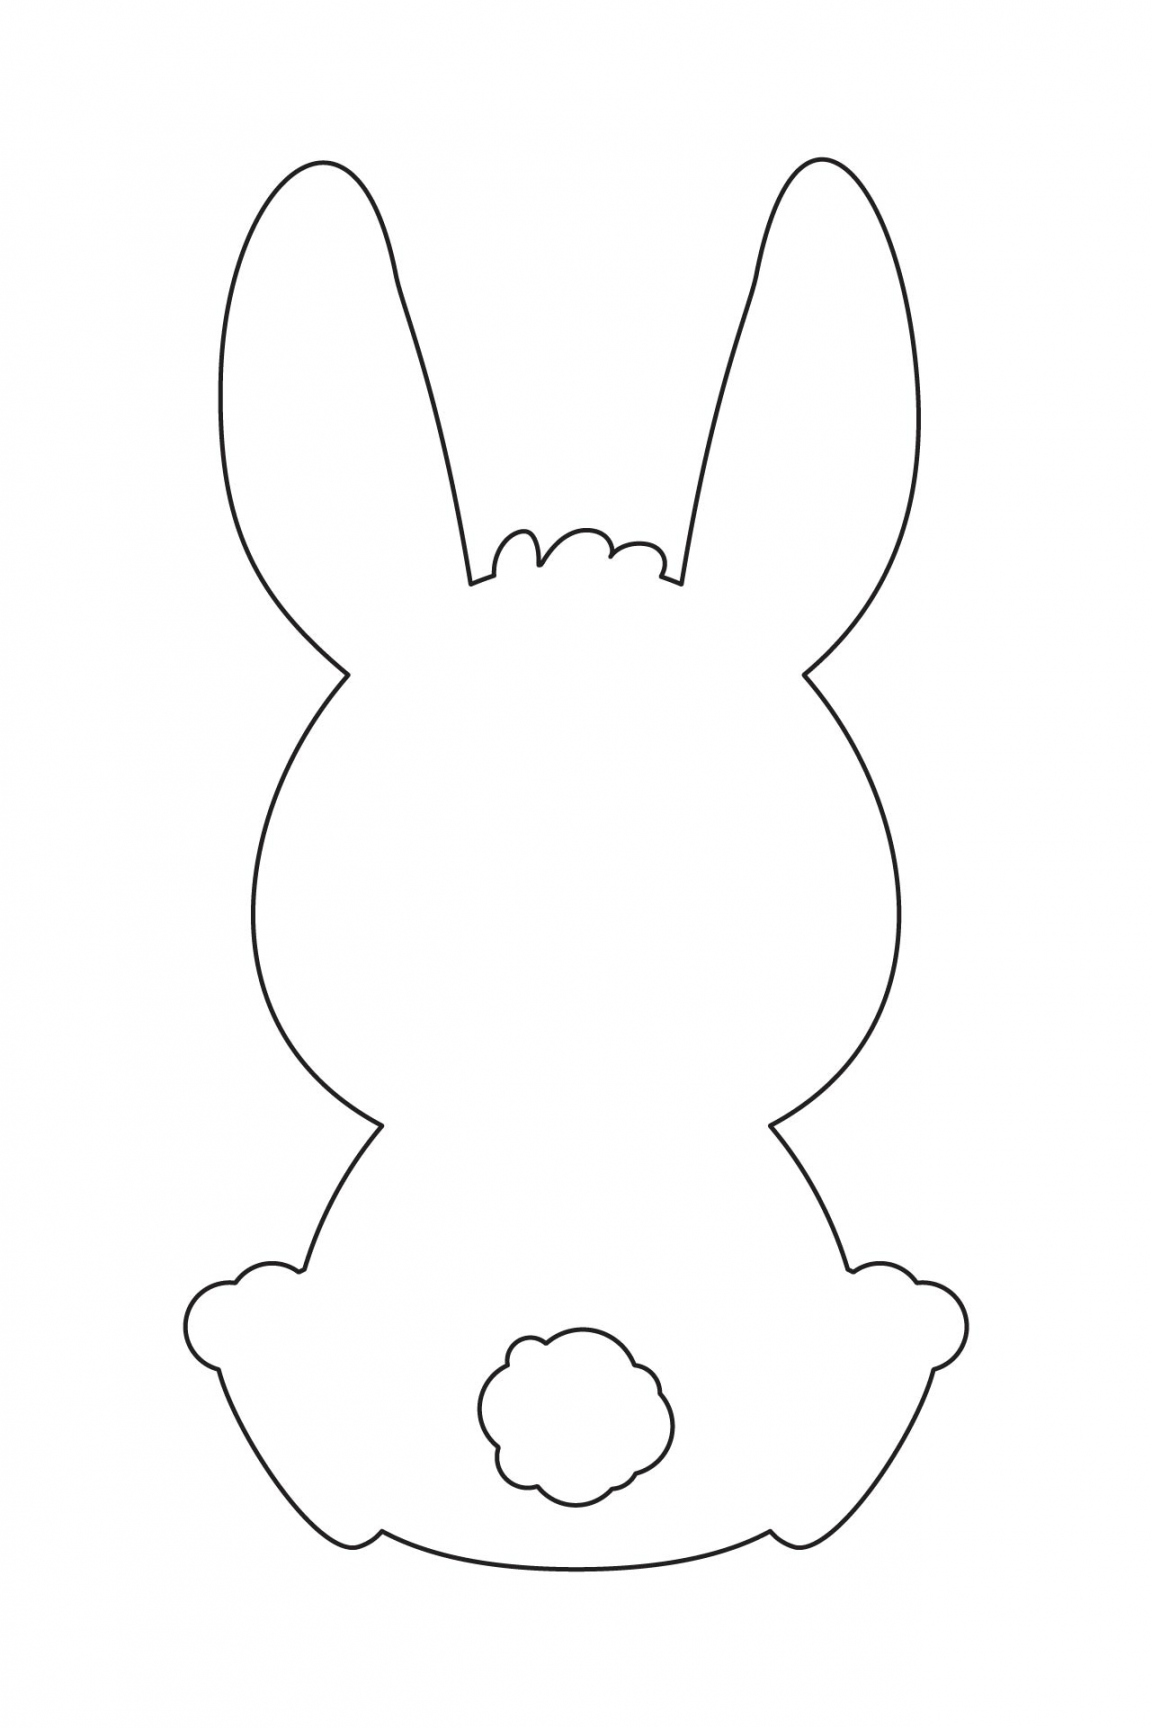 Best Free Printable Easter Bunny Stencil - printablee - Easter Bunny Printable Bunny Template